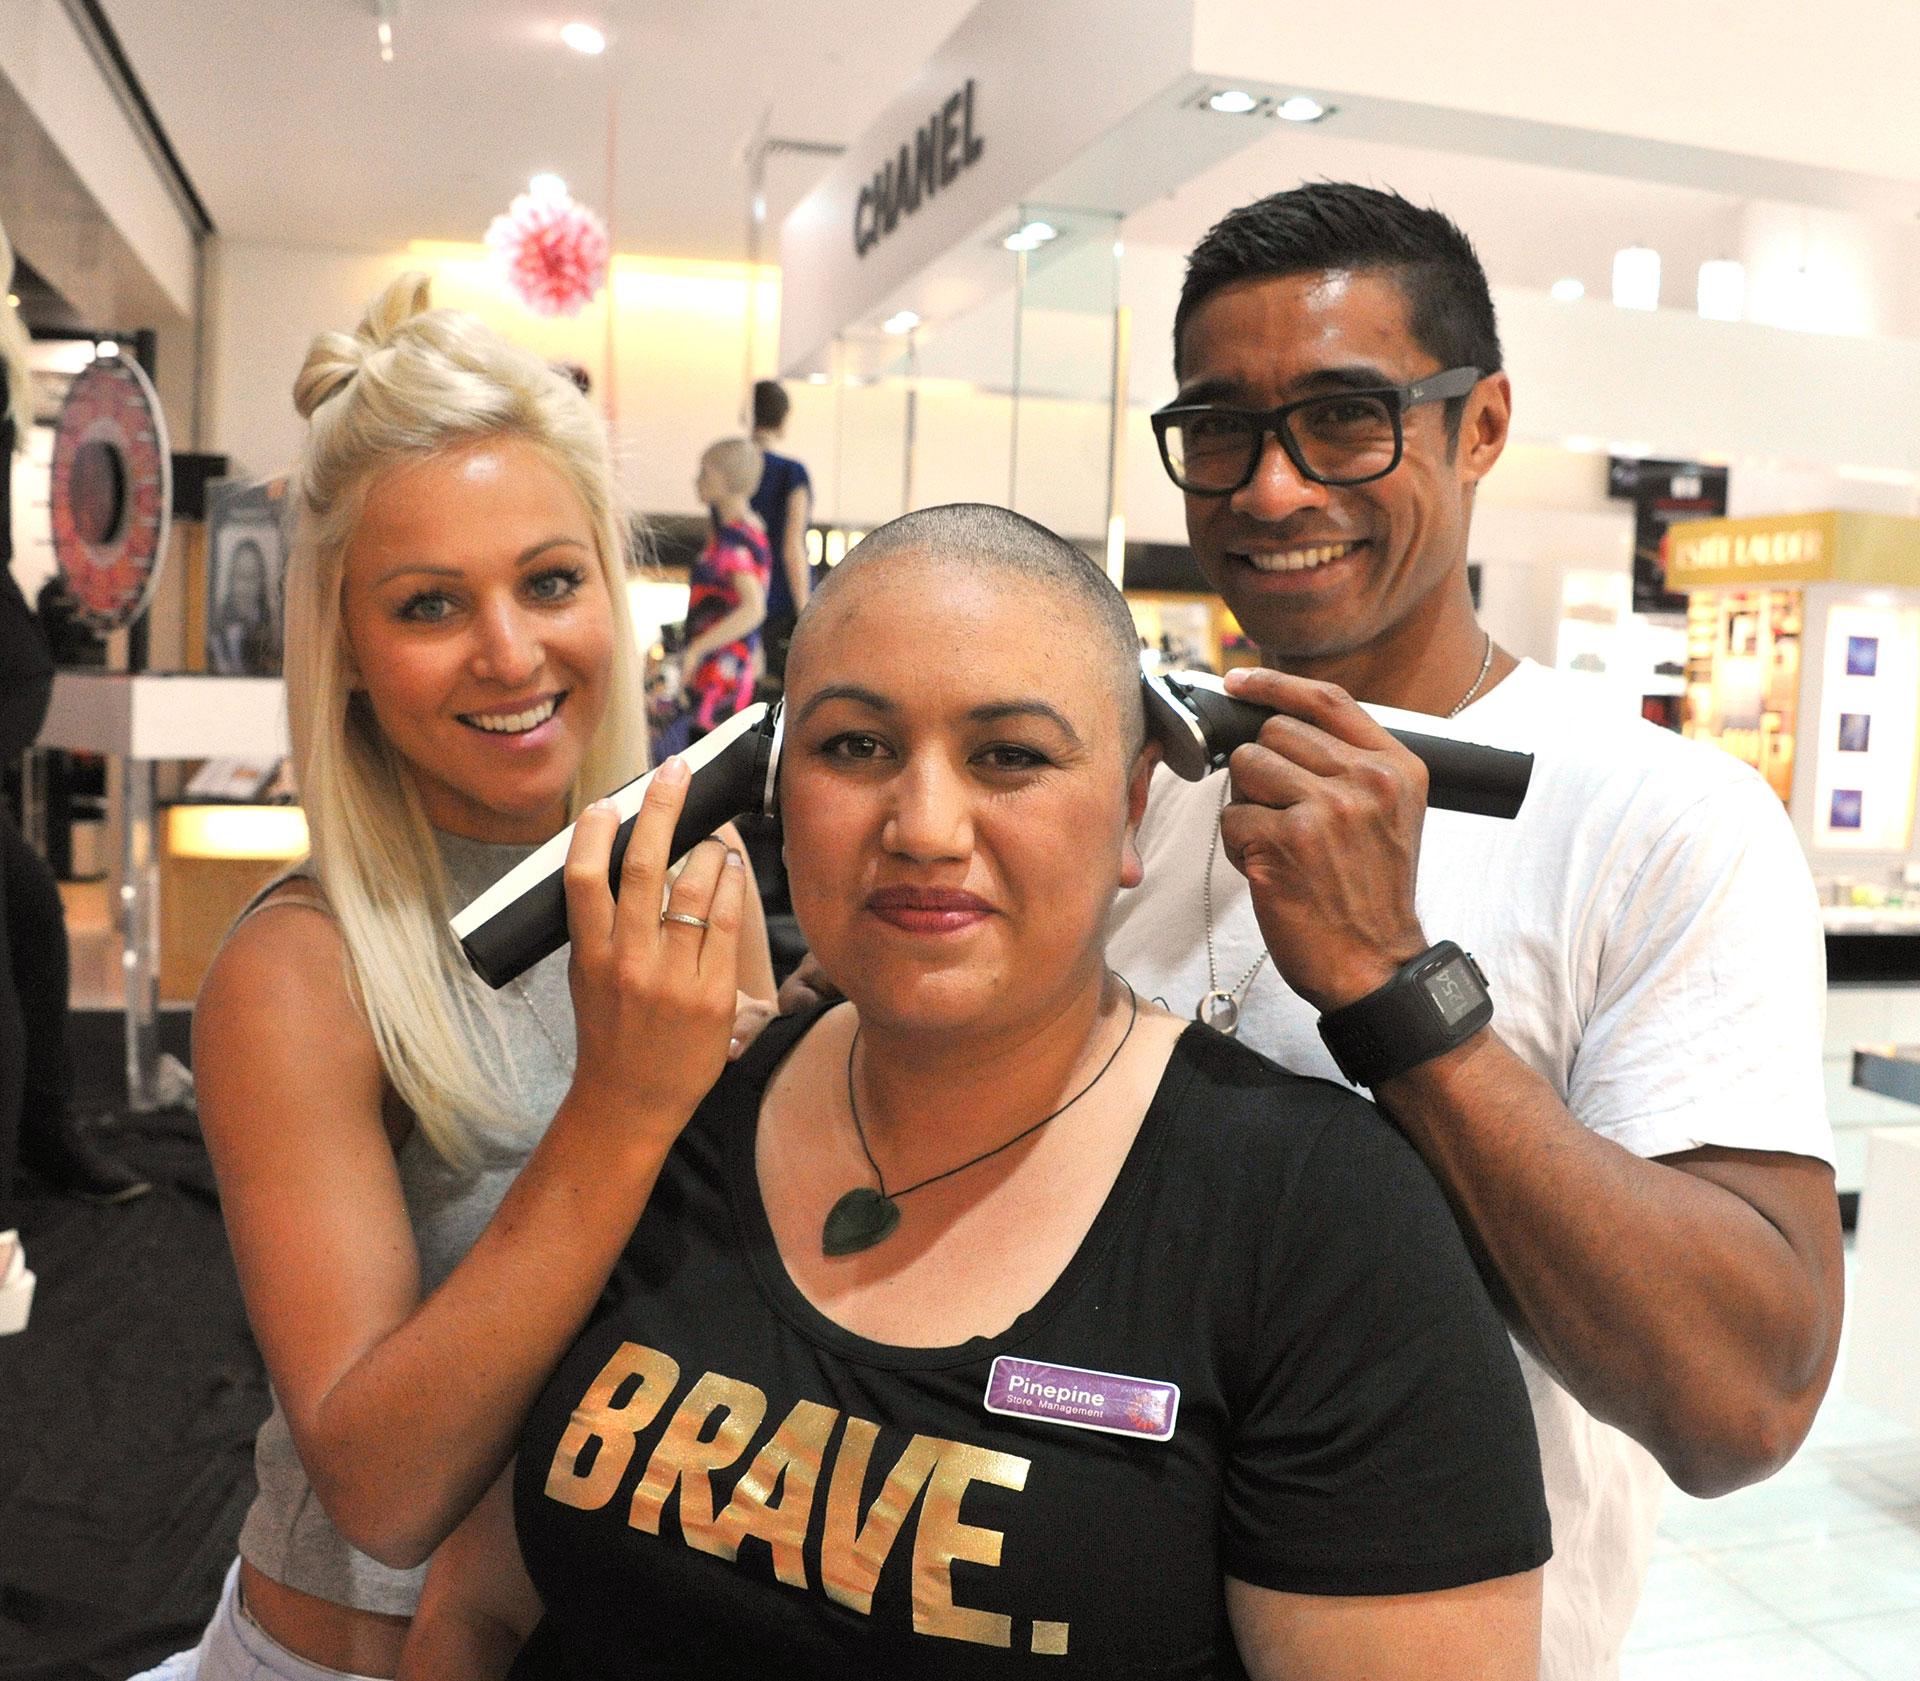 Kerry-Lee Dewing and Pua Magasiva celebrate Shave for a Cure